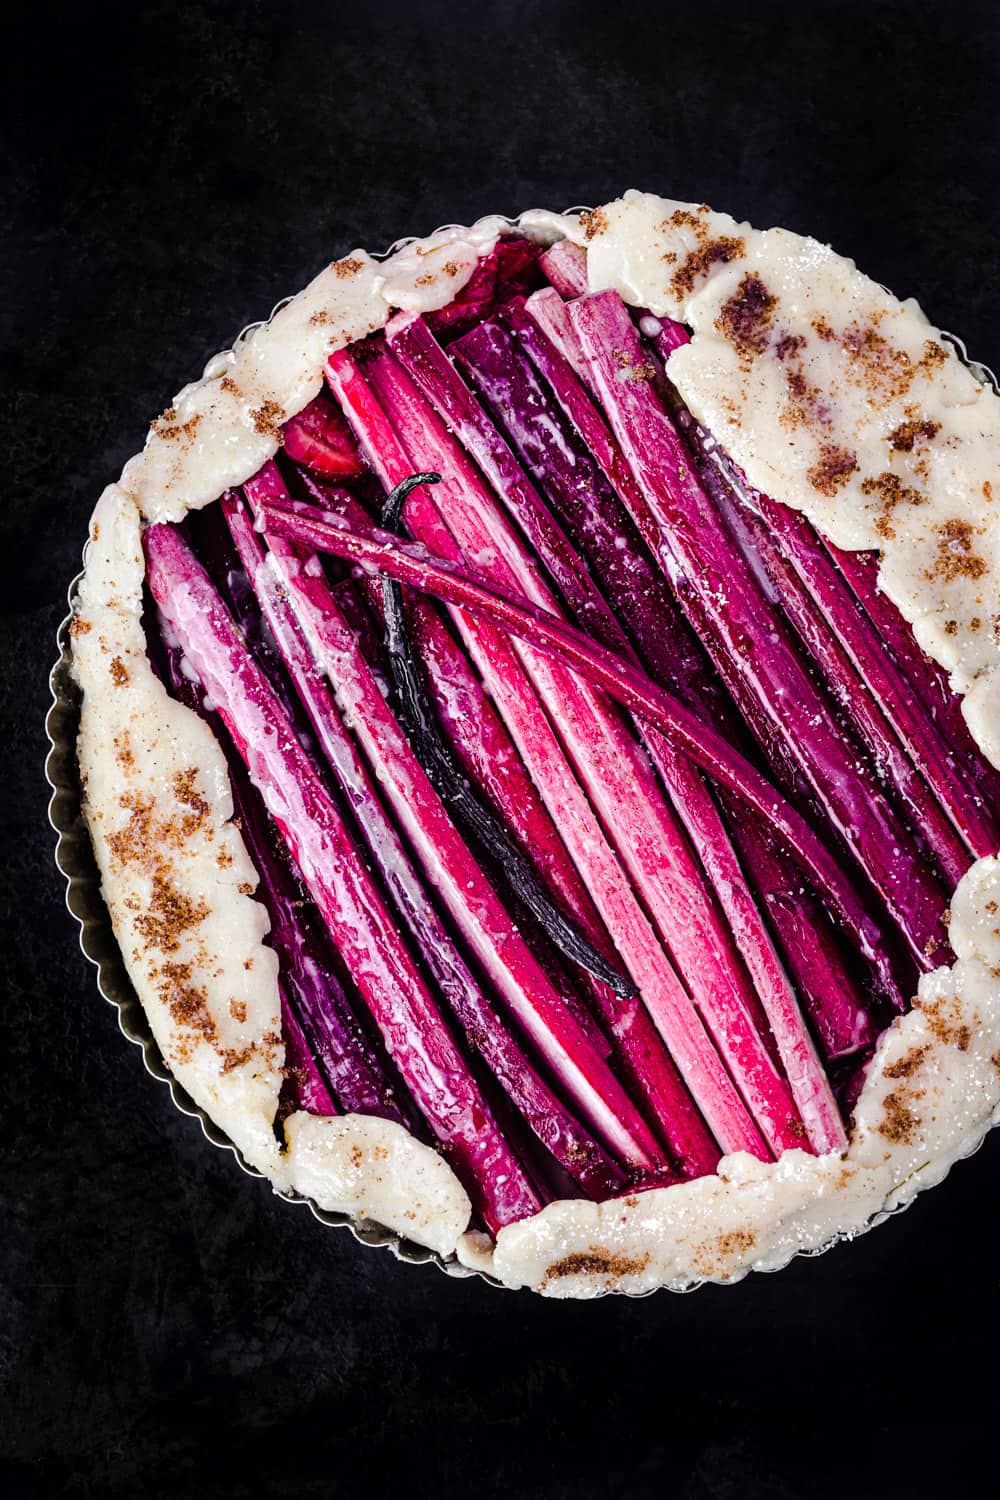 Assembled rhubarb galette pre-oven, overhead shot on a black background.